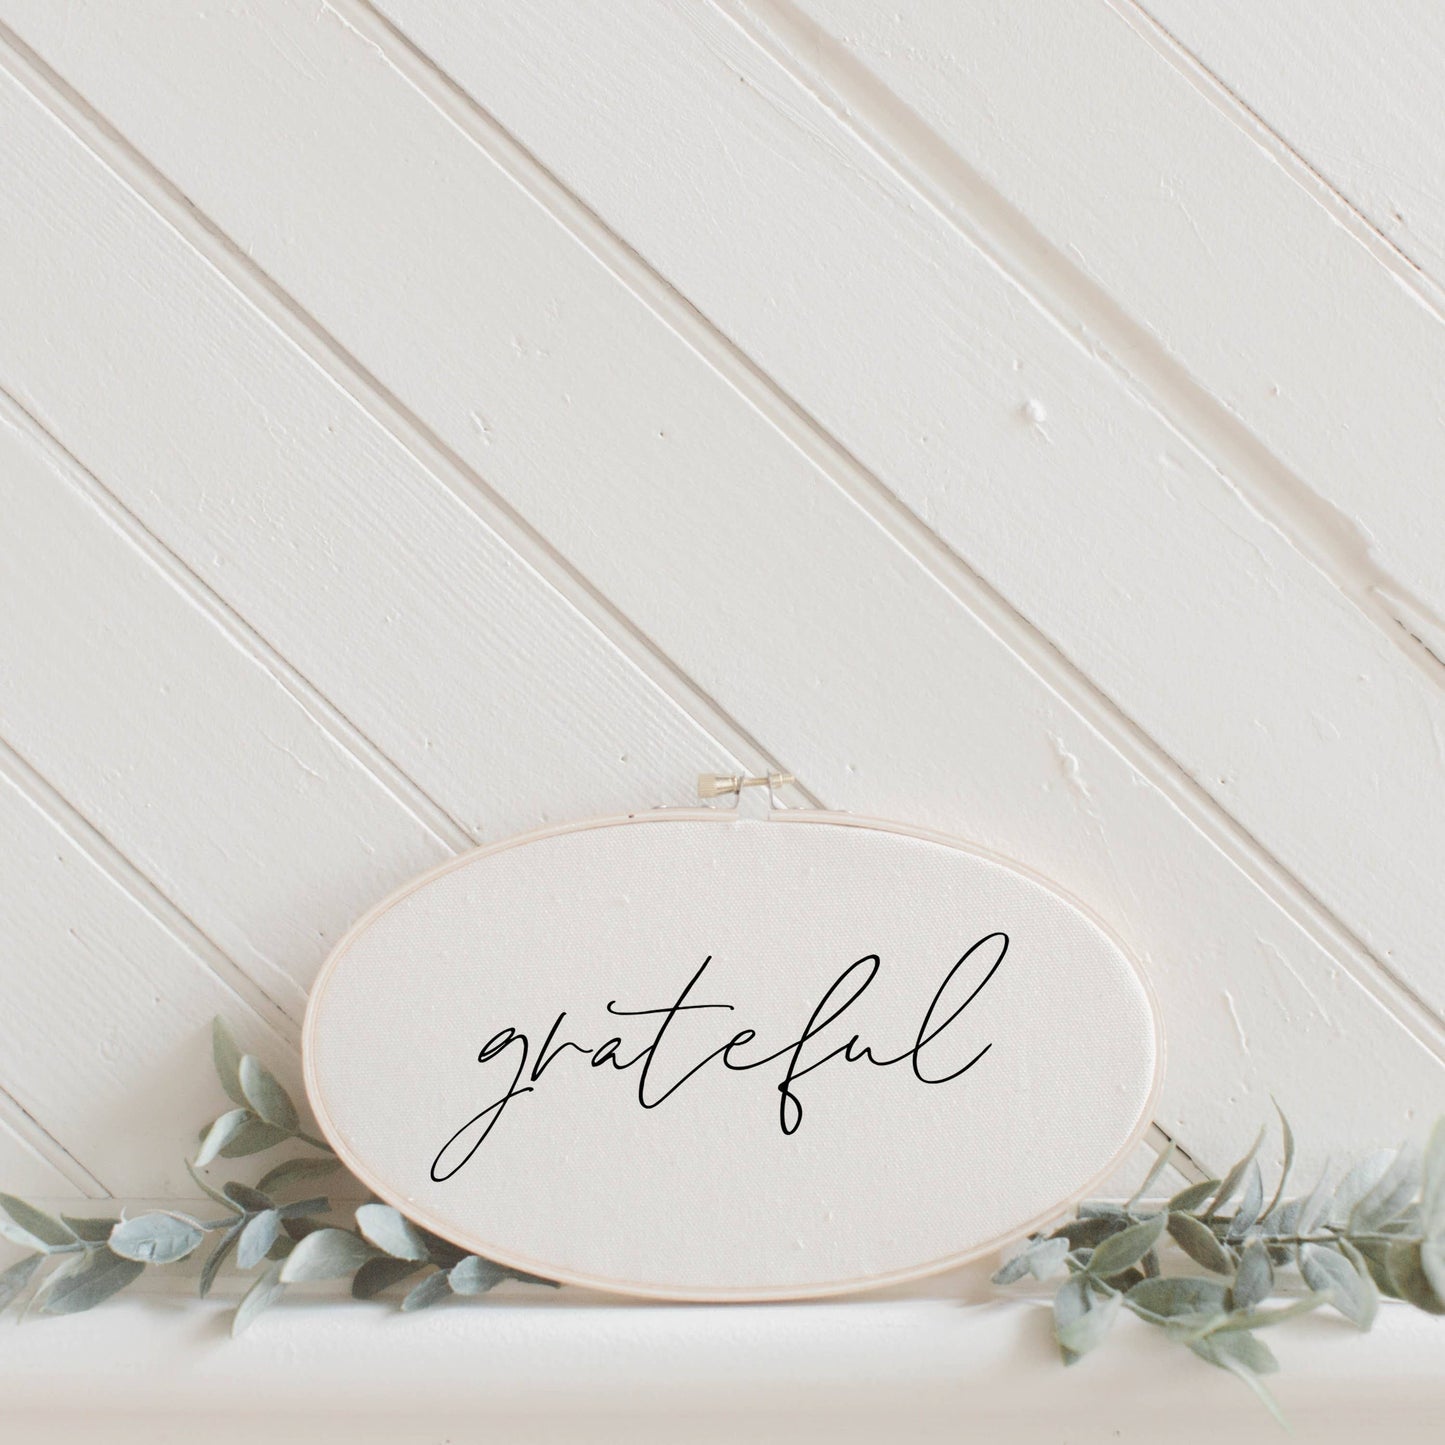 Grateful Faux Embroidery Hoop